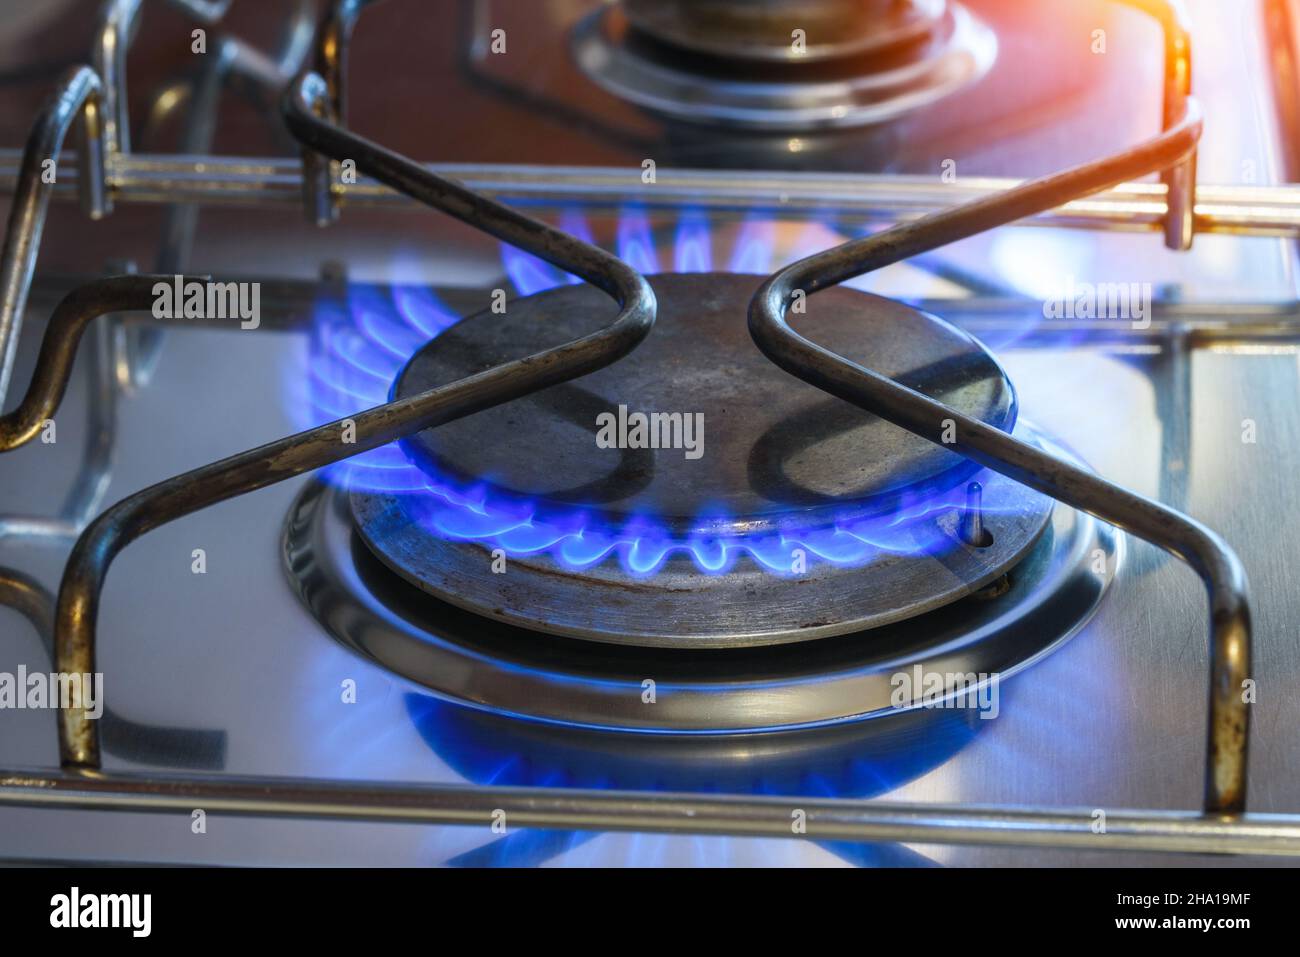 Closeup of a gas ring alight on a cooker hob with blue natual gas flames Stock Photo